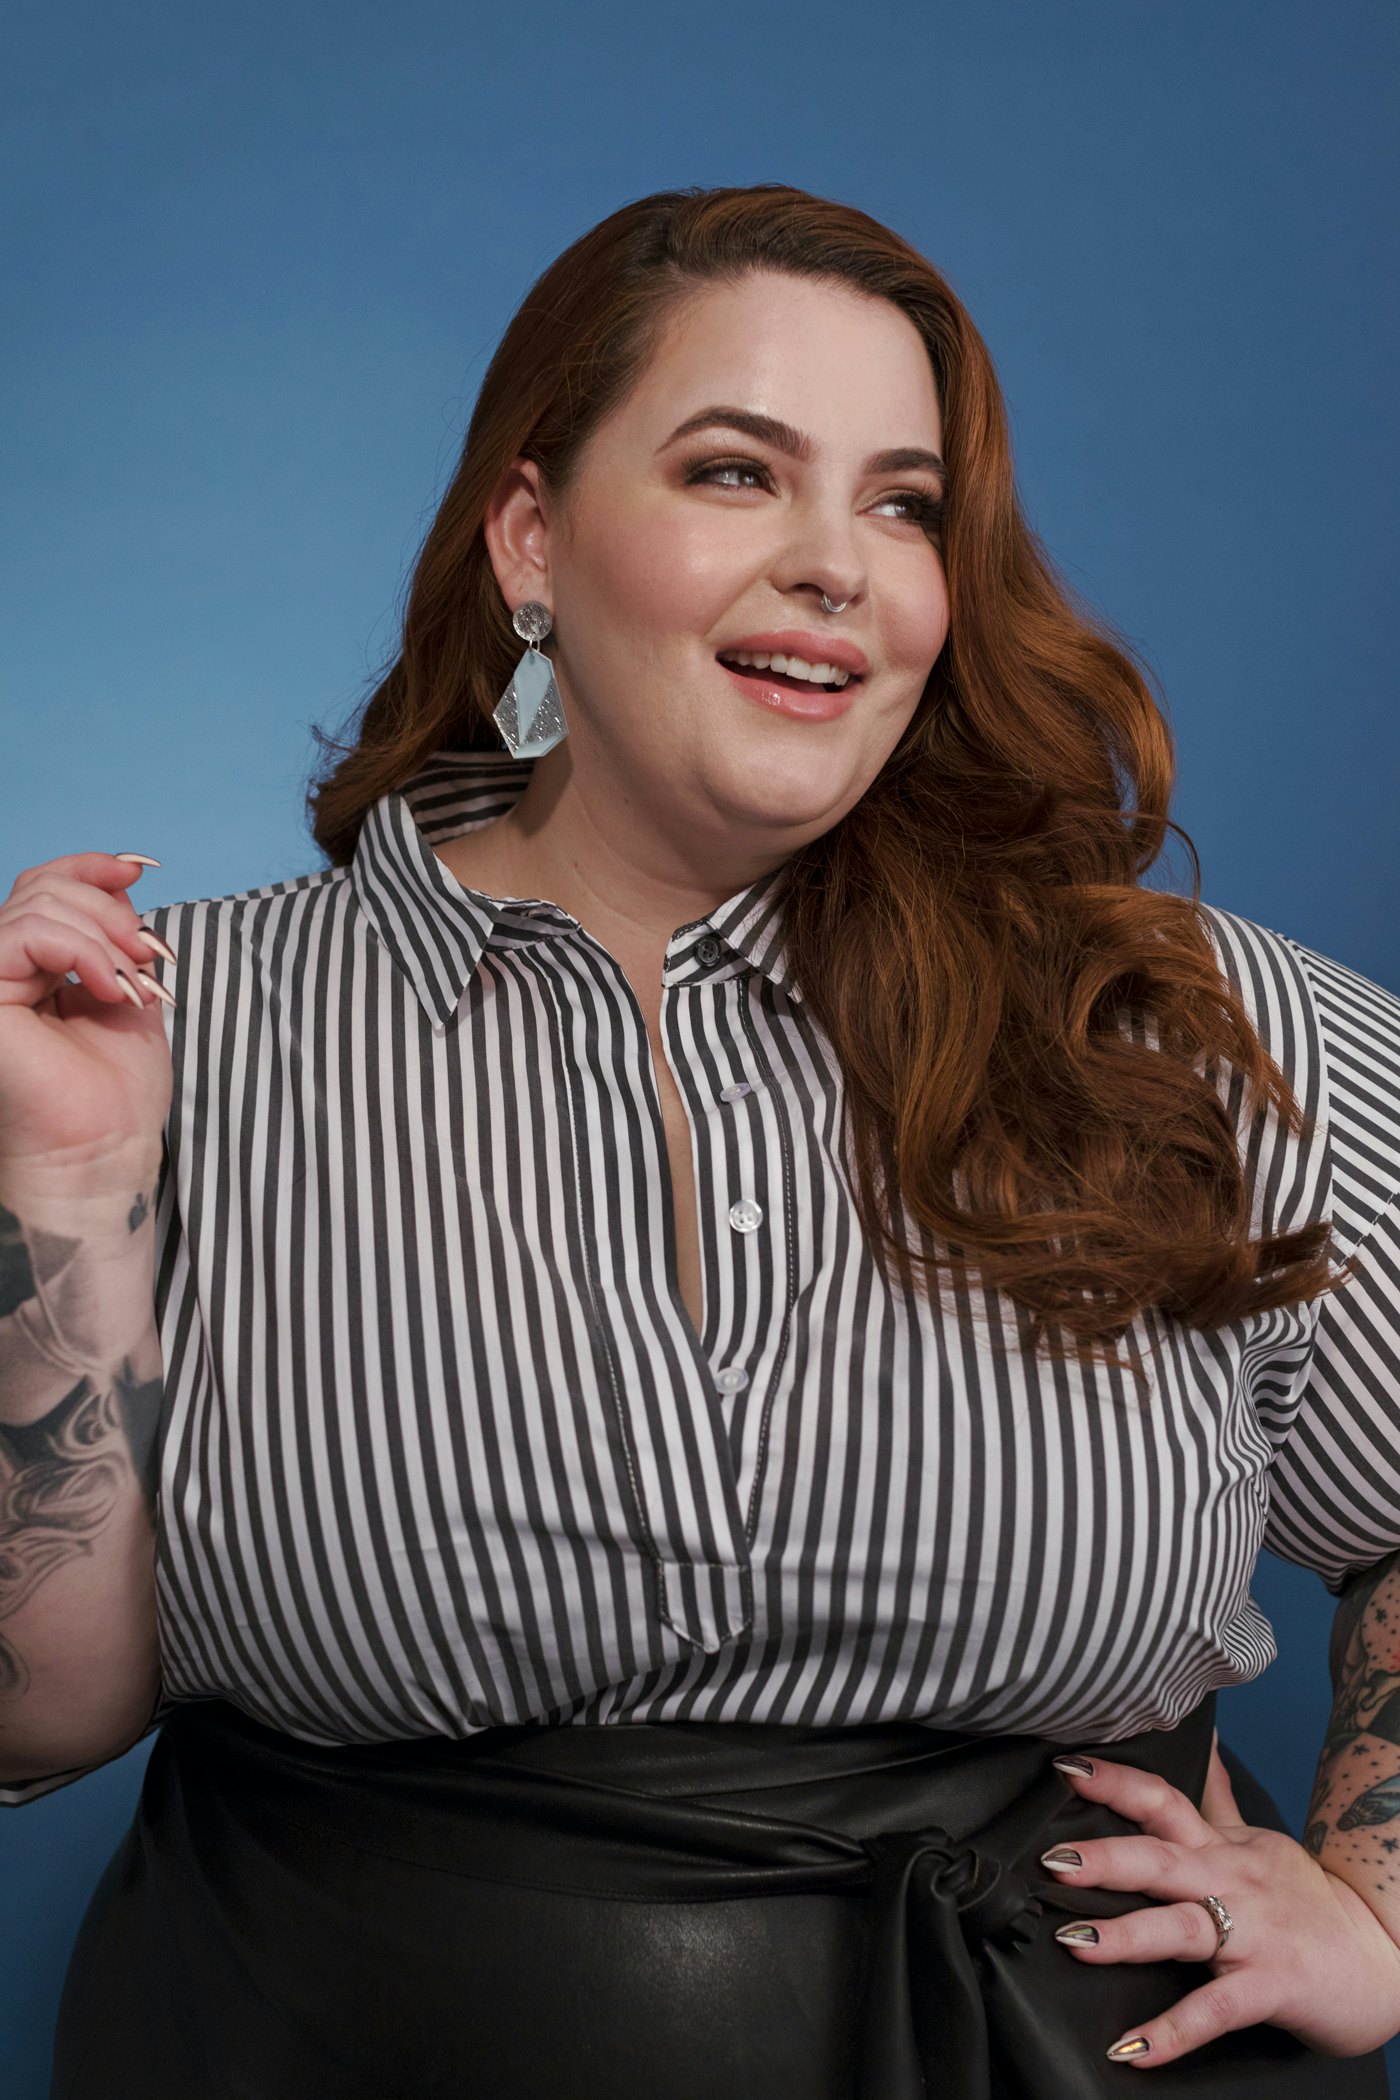 Tess Holliday Reflects on How Far She's Come with #2006vs2016 Shot